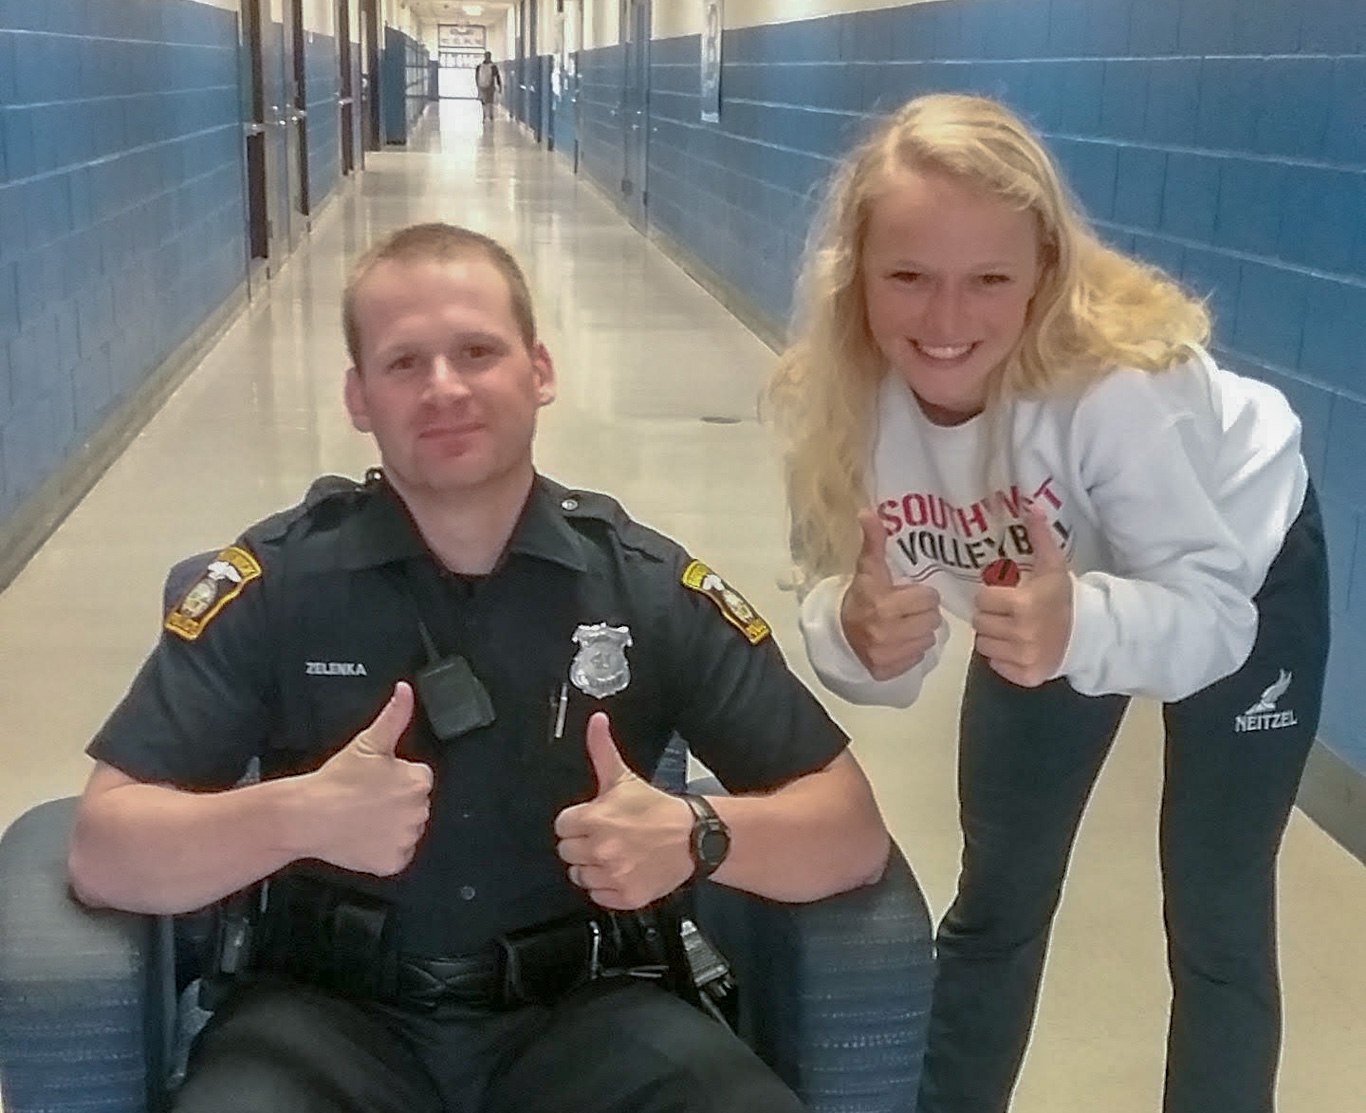 Officer Zelenka with a student while working as a school resource officer 